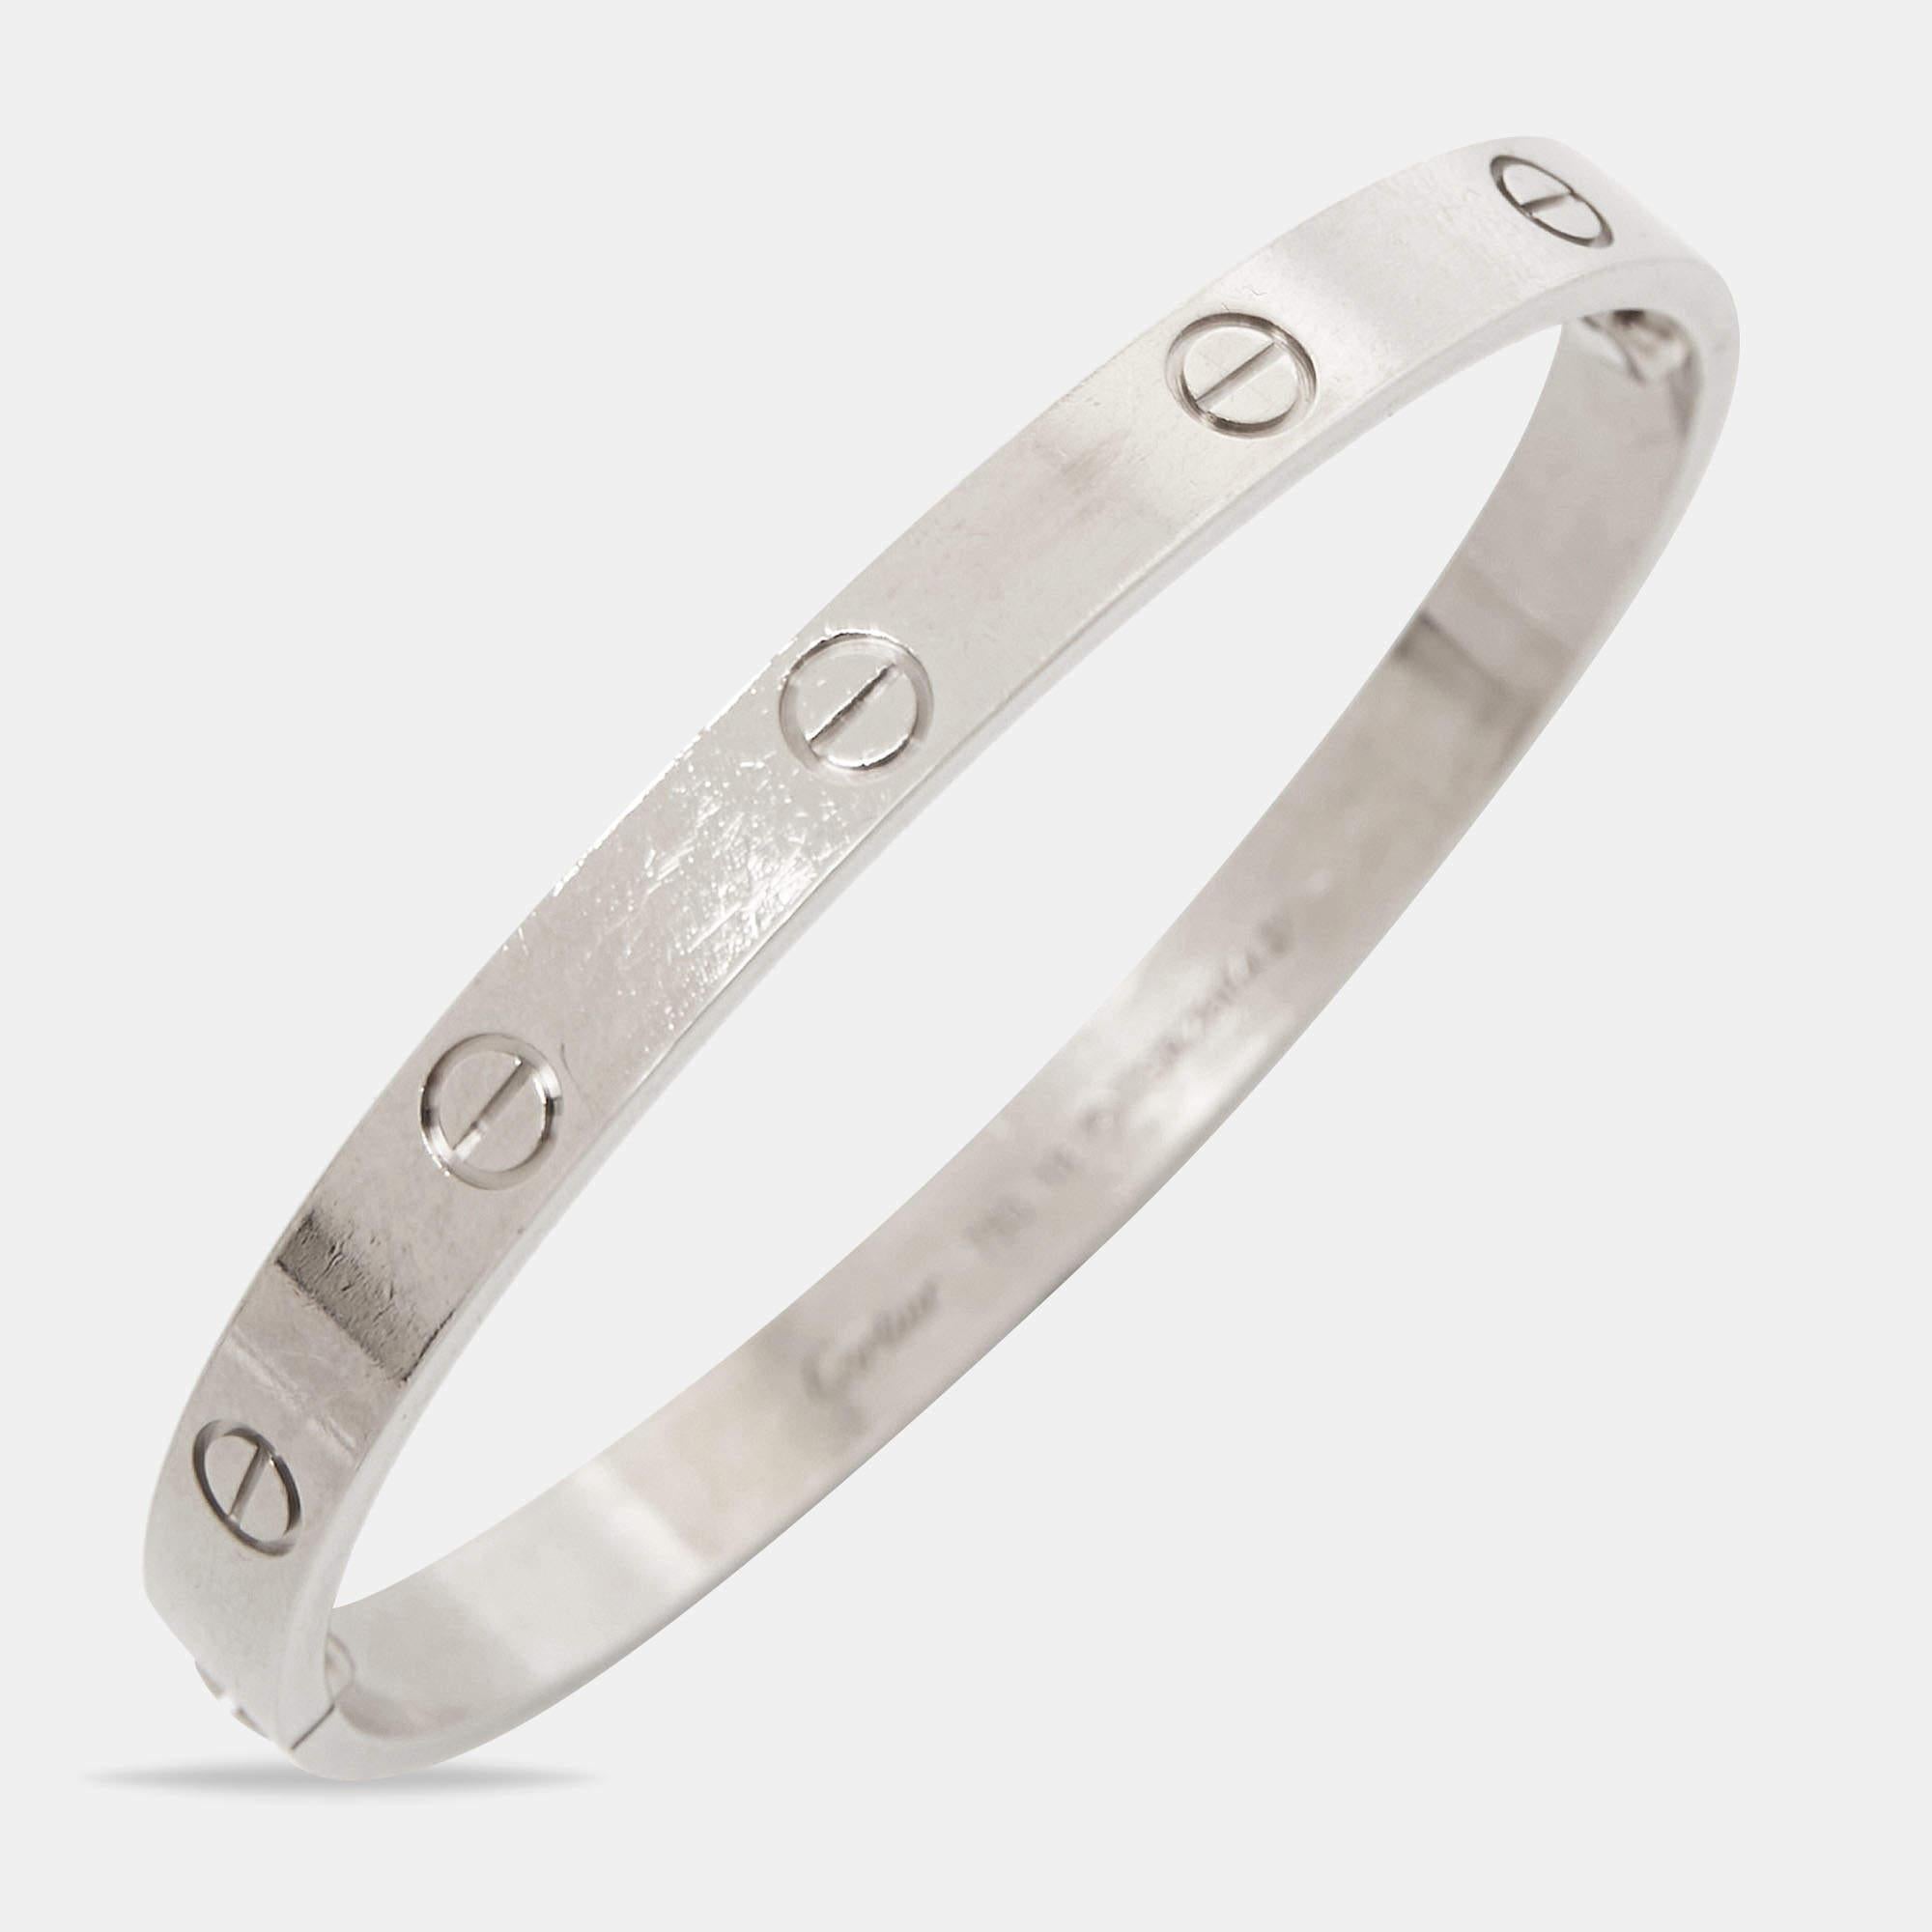 Cartier's Love bracelet is a modern symbol of luxury and a way to lock in one's love. Designed in an oval shape to comfortably sit around your wrist, the iconic love handcuff is laid with distinct screw motifs and secured by screw closure. This